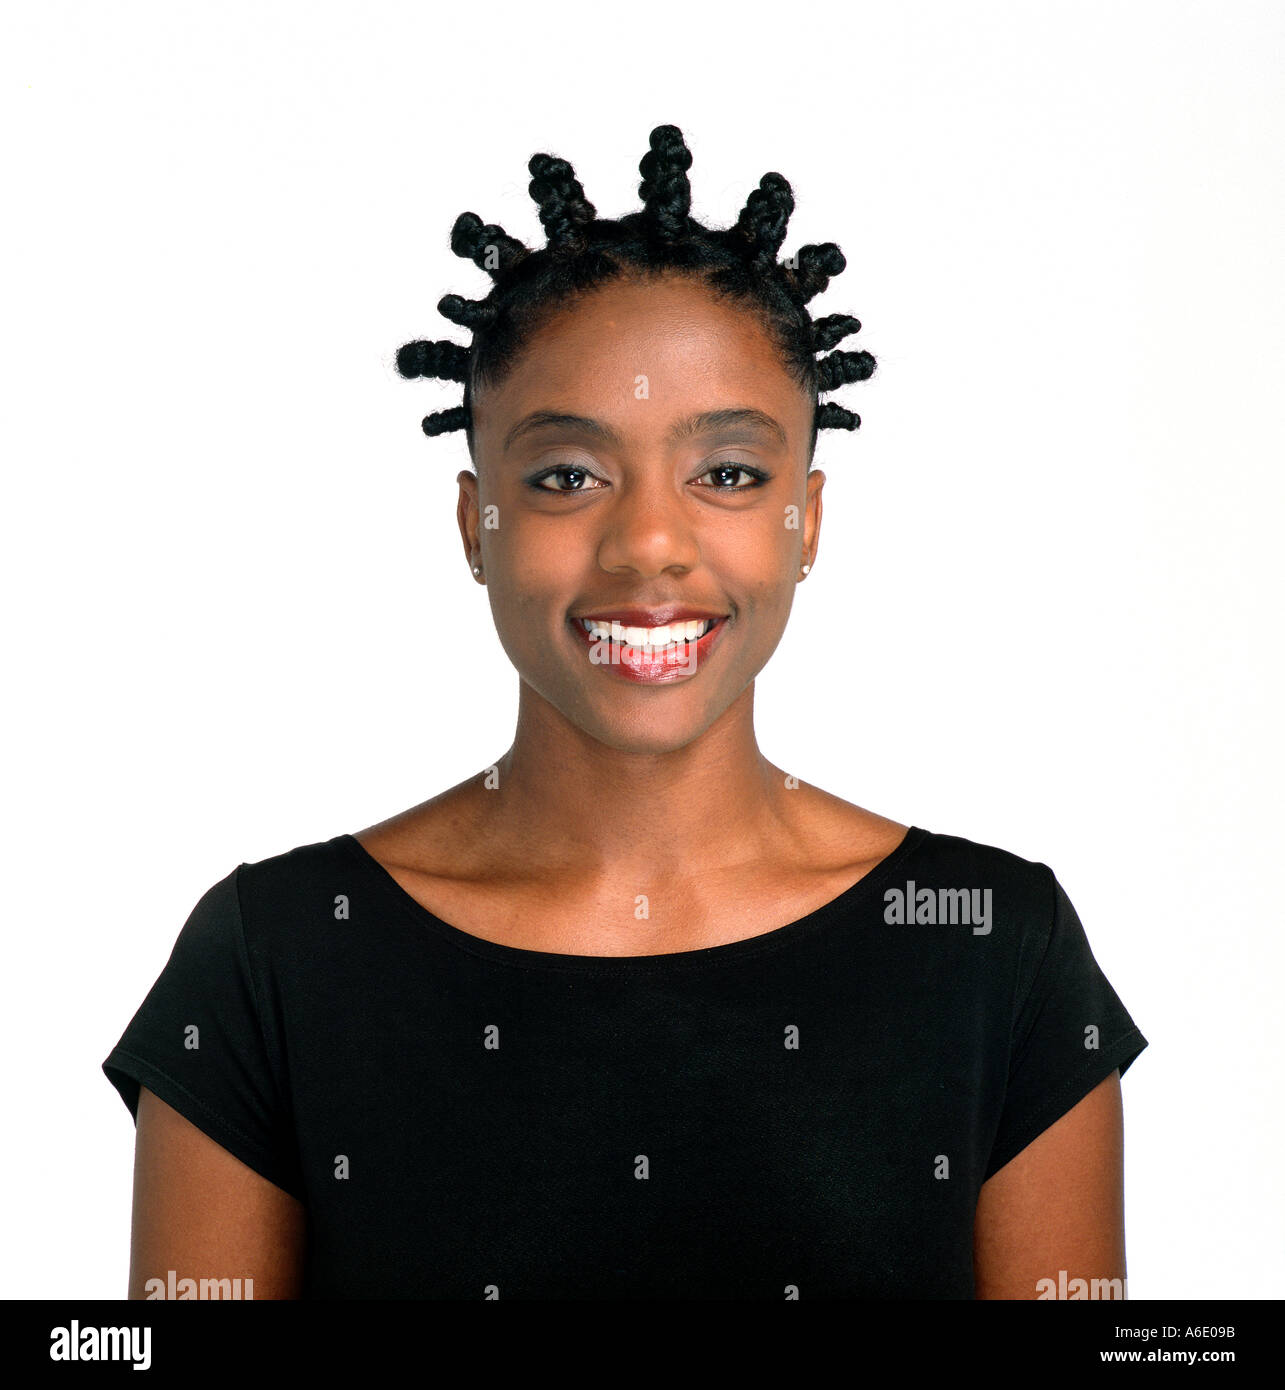 African american woman with cornrow hair poses in portrait. Stock Photo